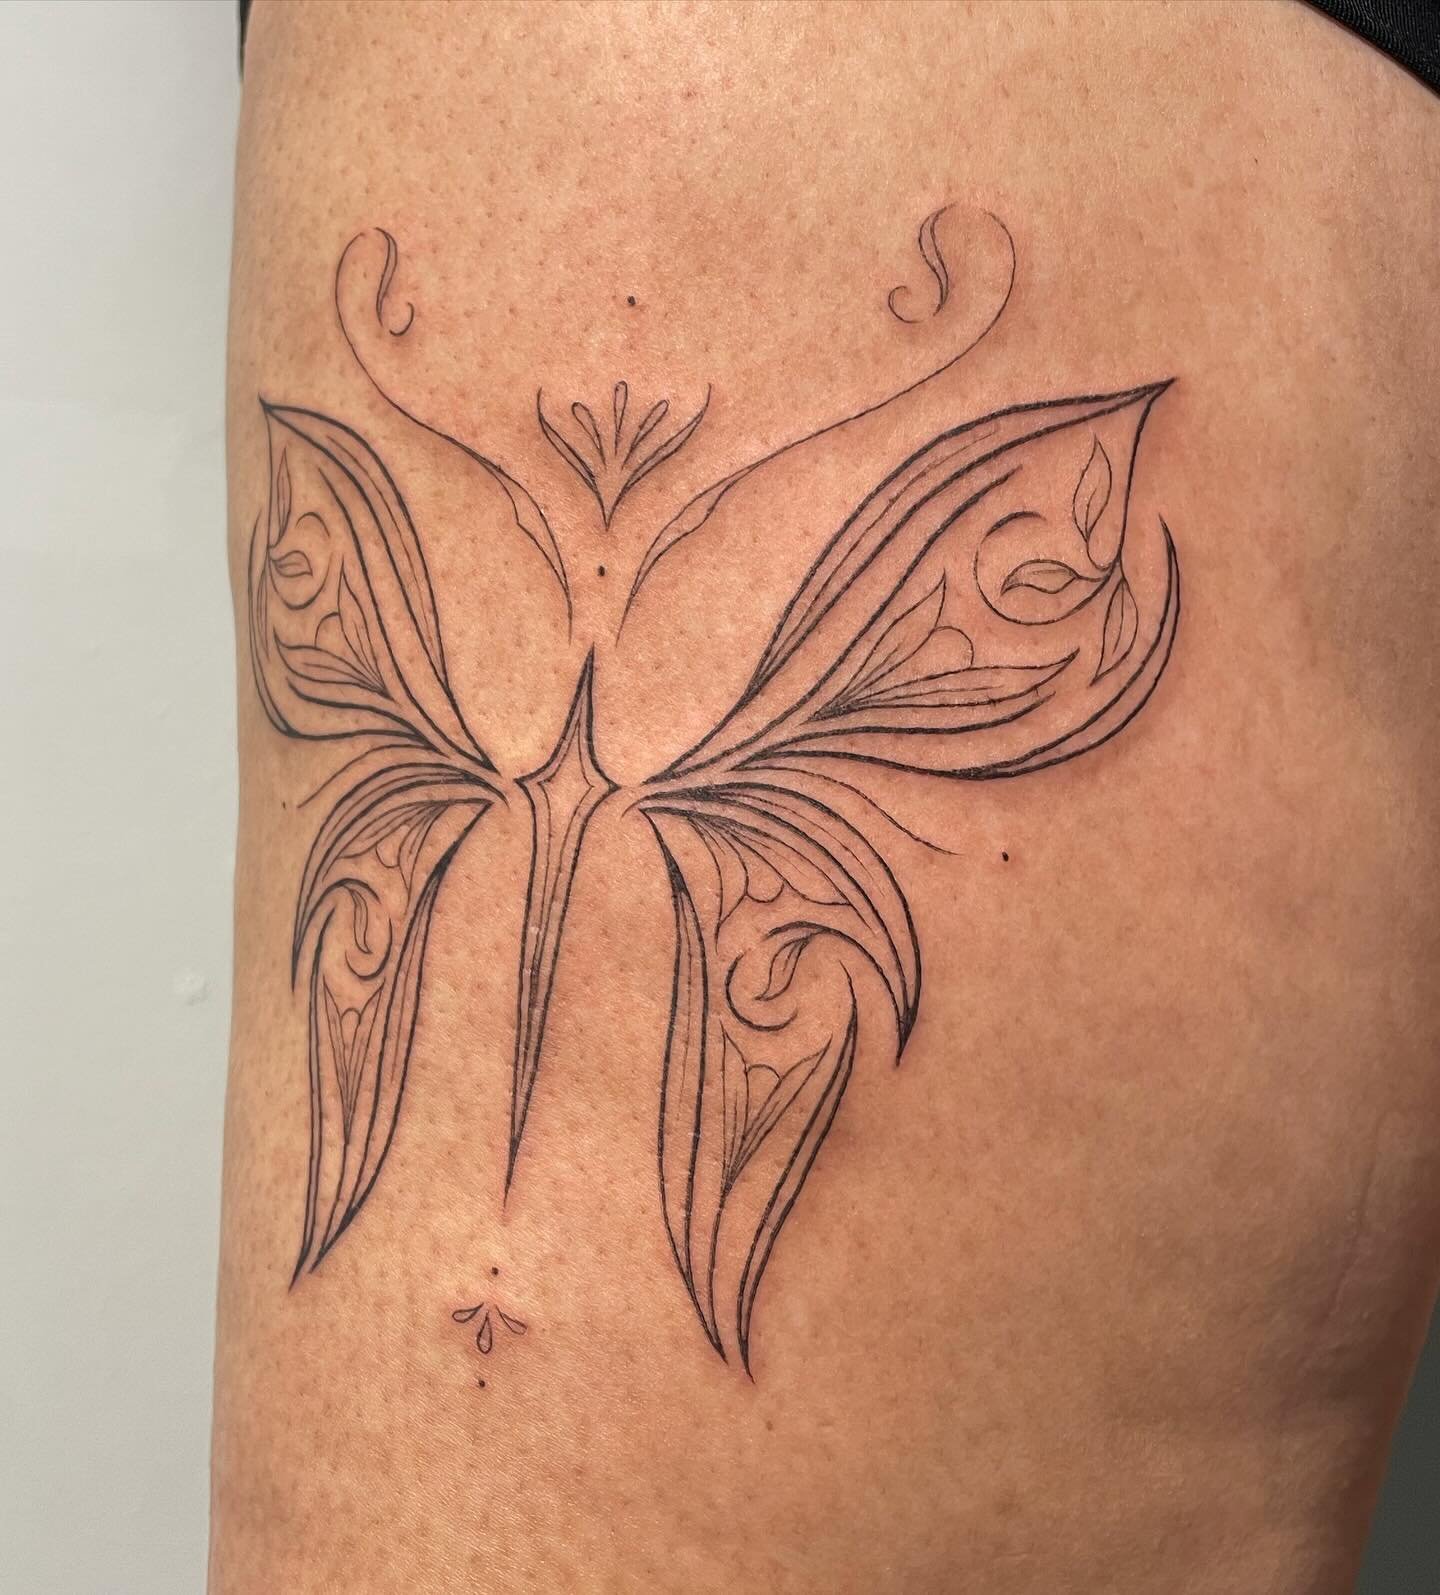 gorgeous custom for Mya - based off a symmetrical floral flash crossed with an ornamental buttery 🦋 🌀✨ thank you so much!!! #ornamentaltattoo #butterflytattoo #symmetricaltattoo